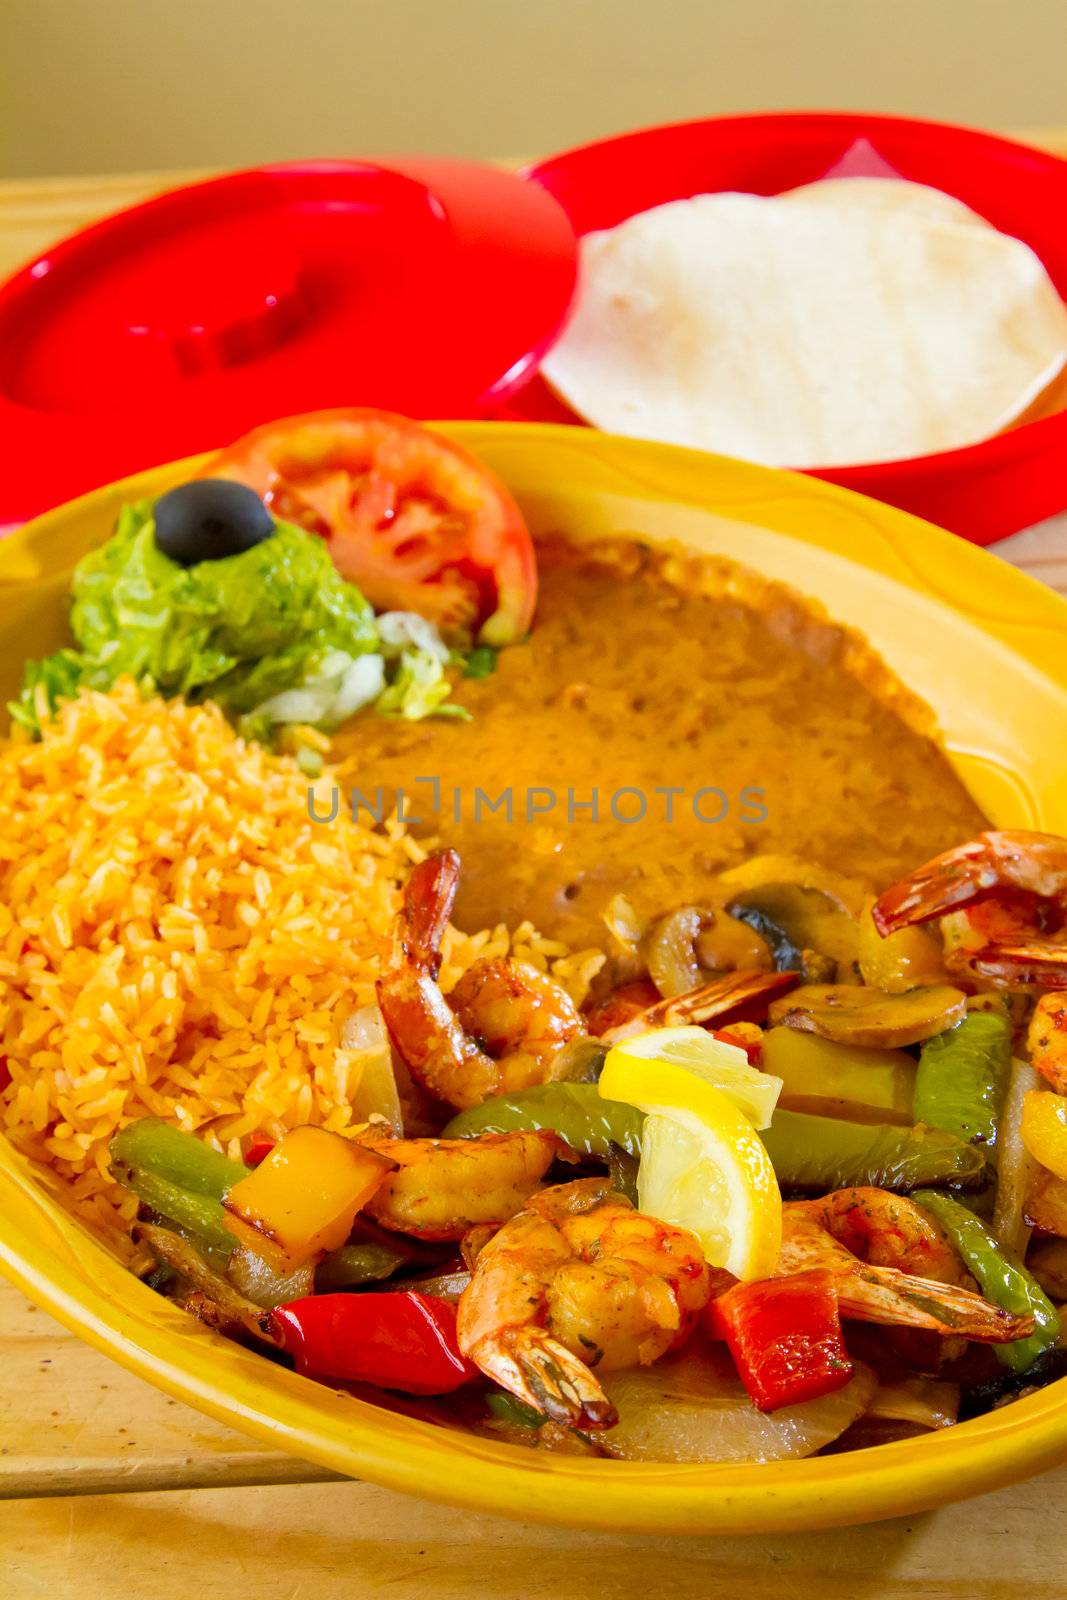 An authentic Mexican food restaurant has plated fajitas ready to serve.